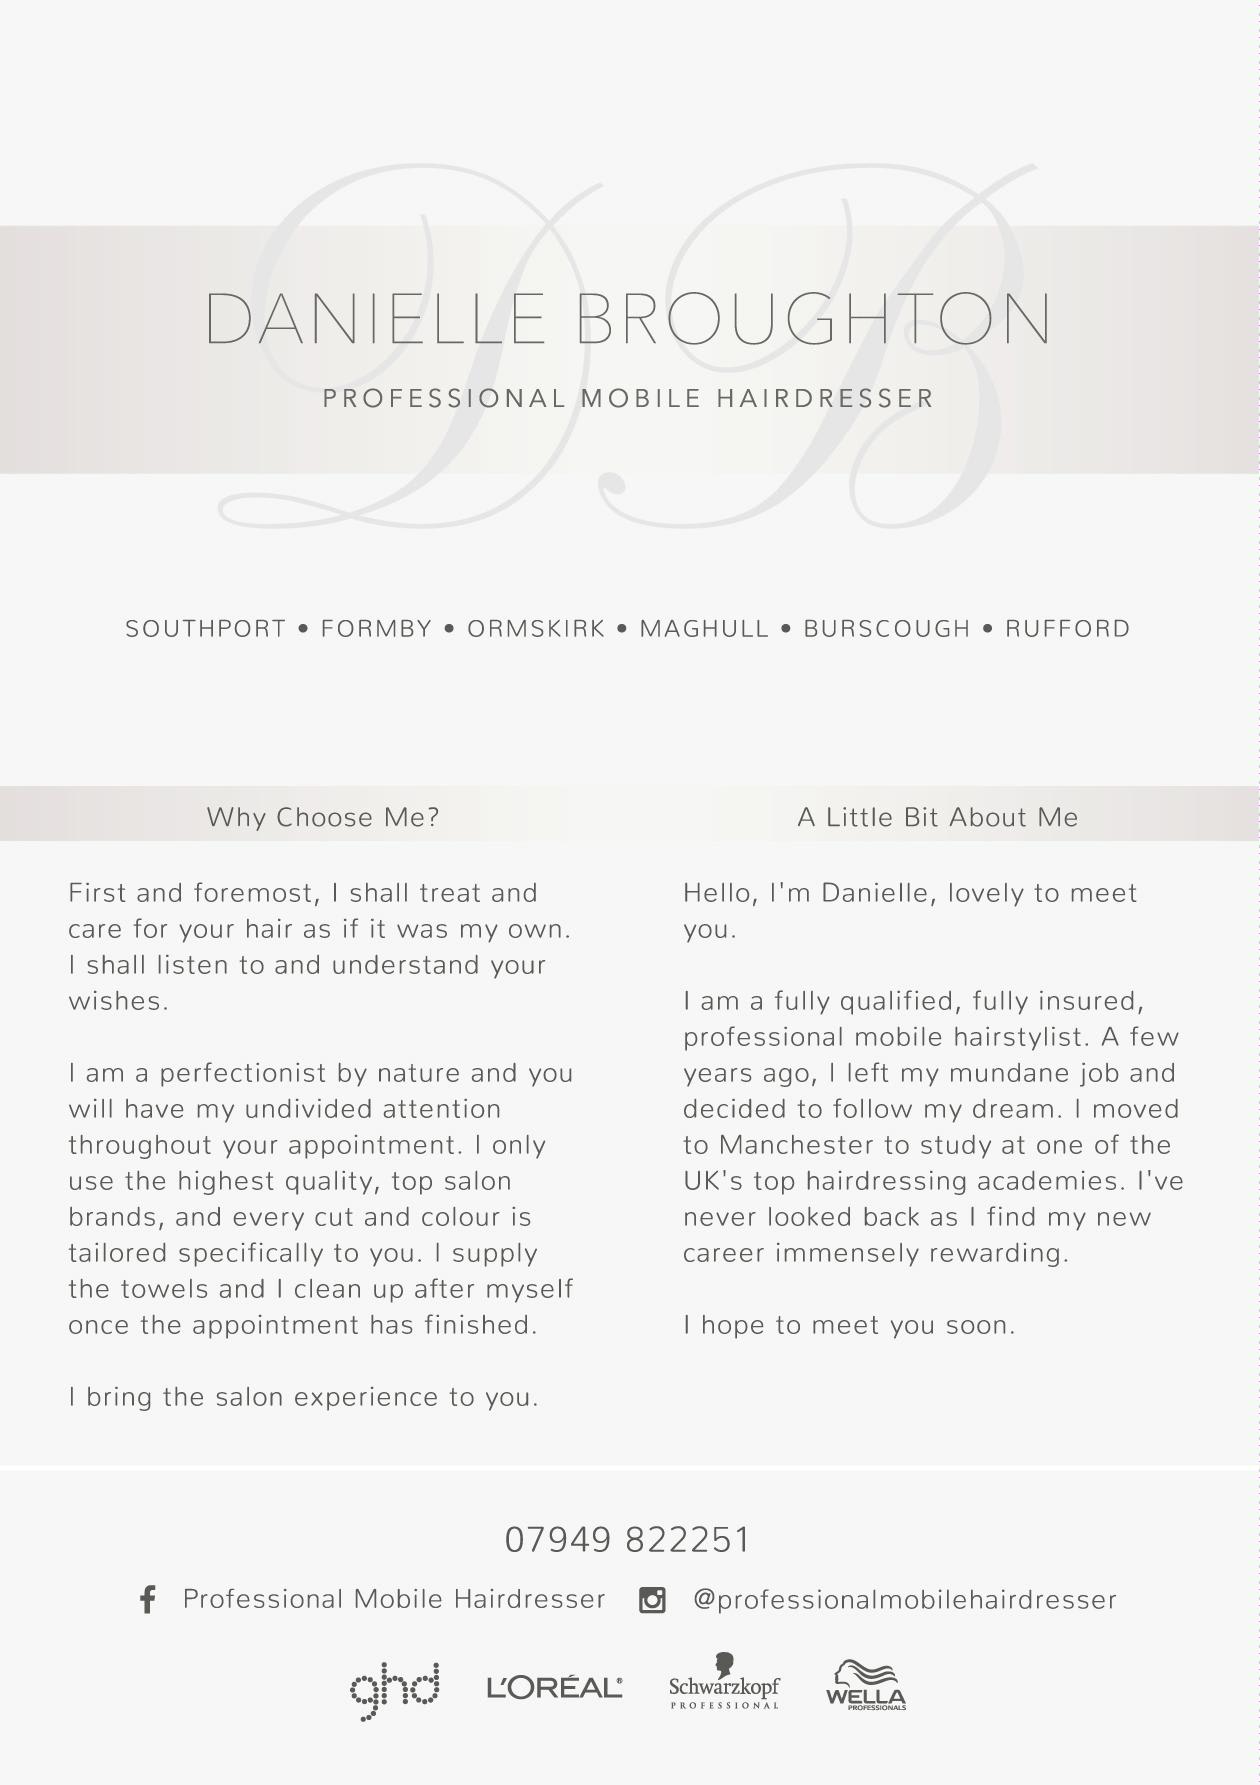 Danielle Broughton - Professional Mobile Hairdresser | Southport Road, Southport PR8 5LE | +44 7949 822251